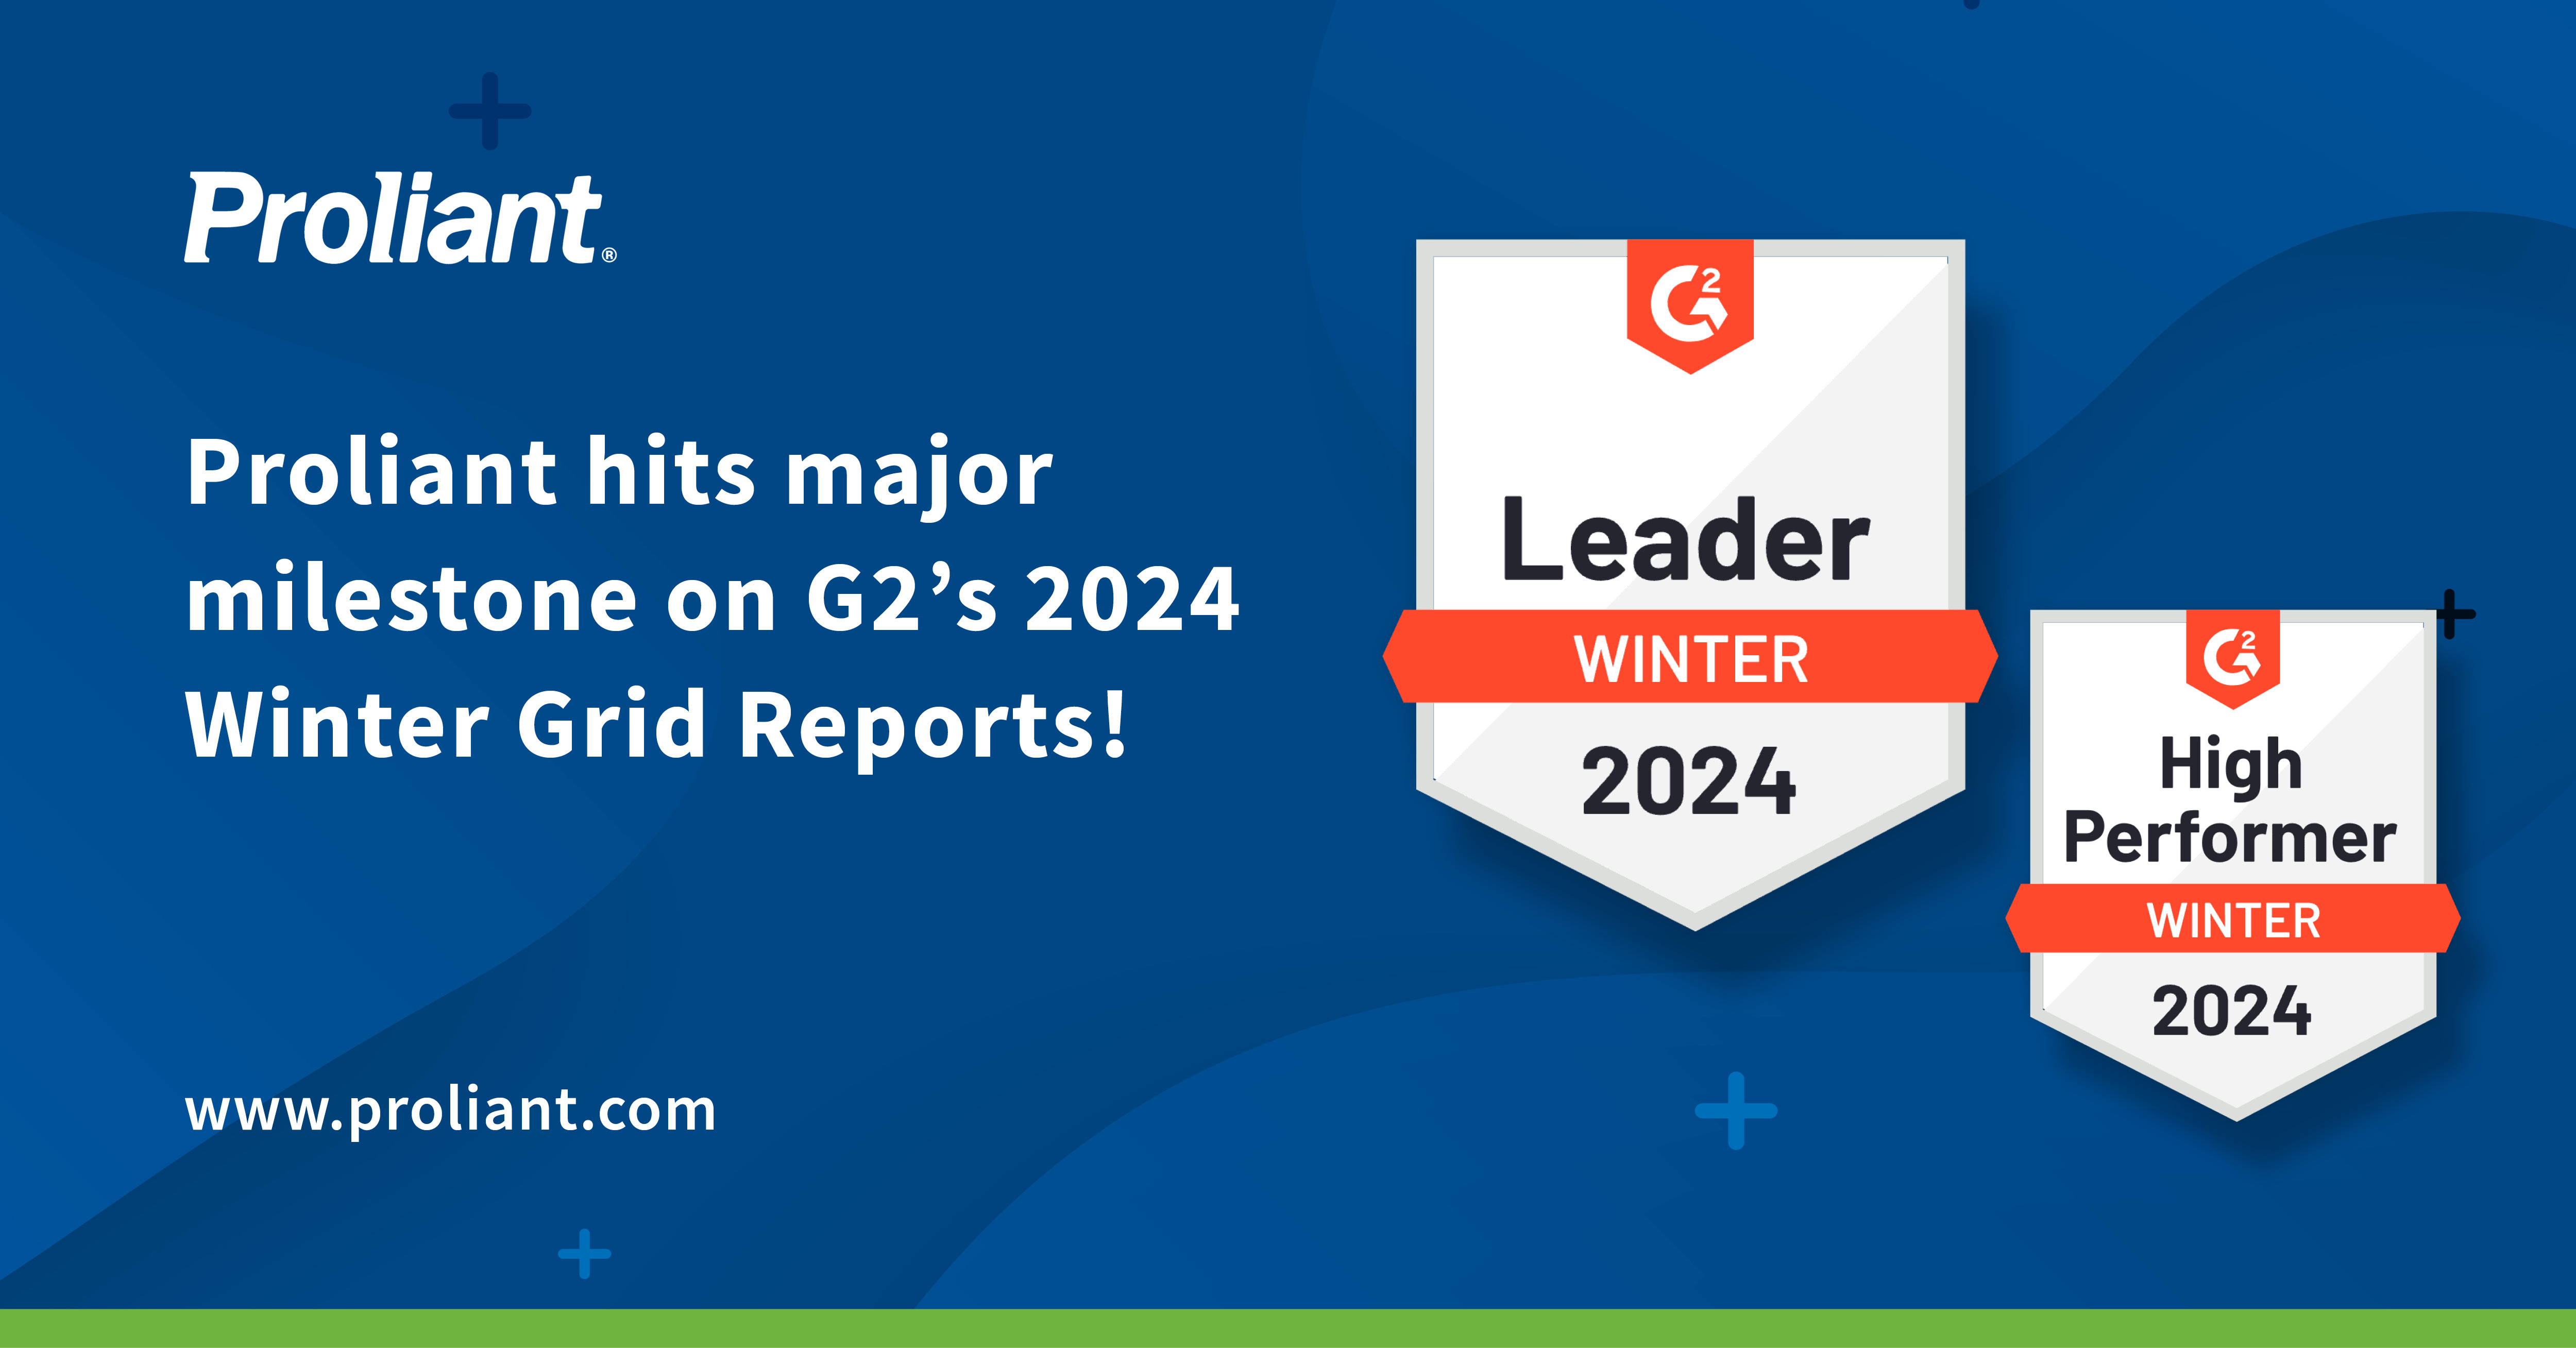 Proliant Hits Milestone on 105 of G2's 2024 Winter Grid Reports